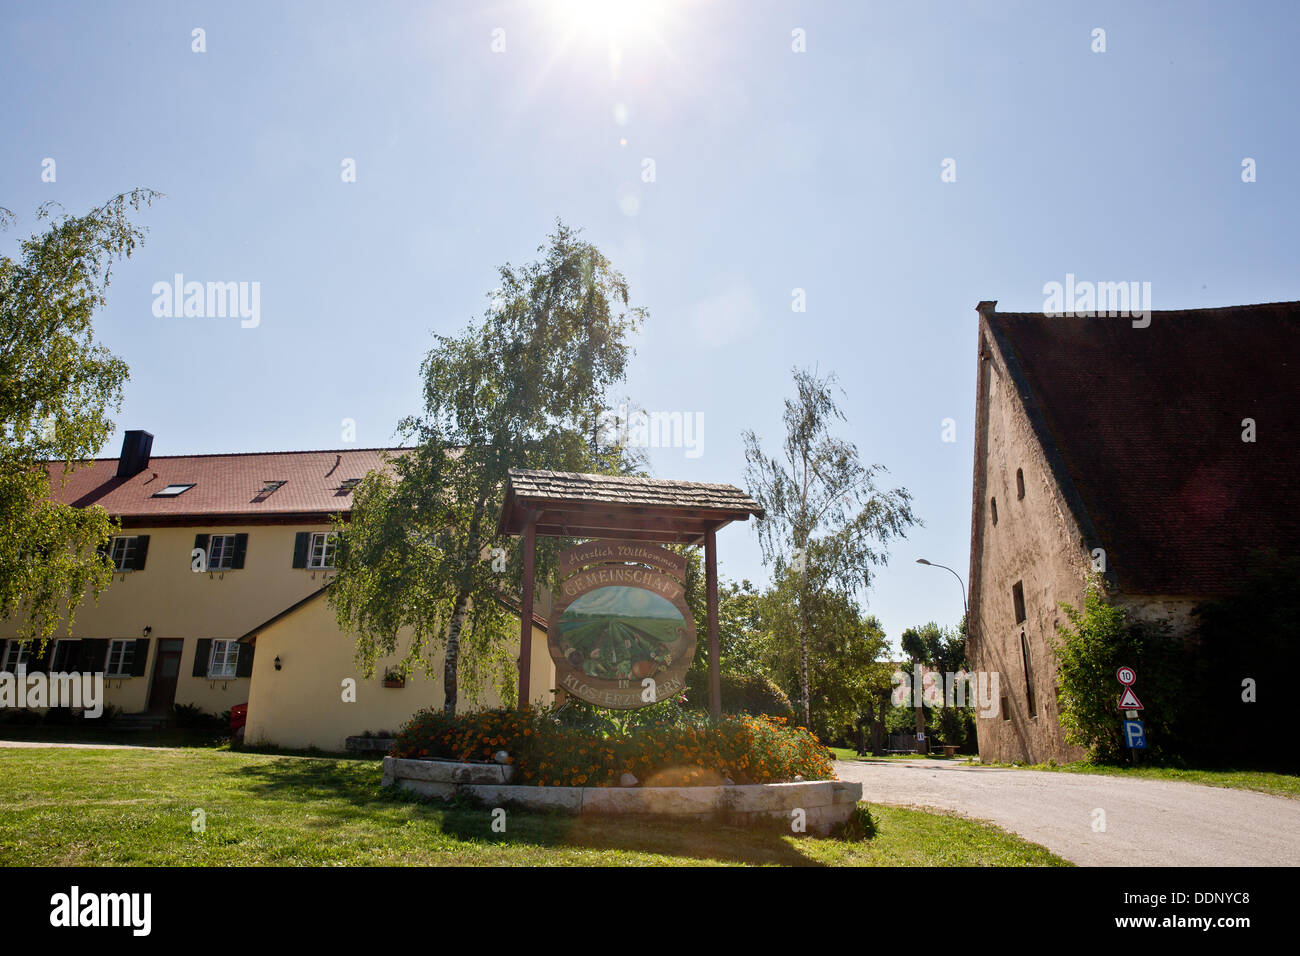 View of a welcome sign in Klosterzimmern near Deiningen, Germany, 05 September 2013. The village is home to the religious community 'Zwoelf Staemme' ('Twelve Tribes'). The police retrieved almost 30 children from the controversial religious community. Photo: DANIEL KARMANN Stock Photo